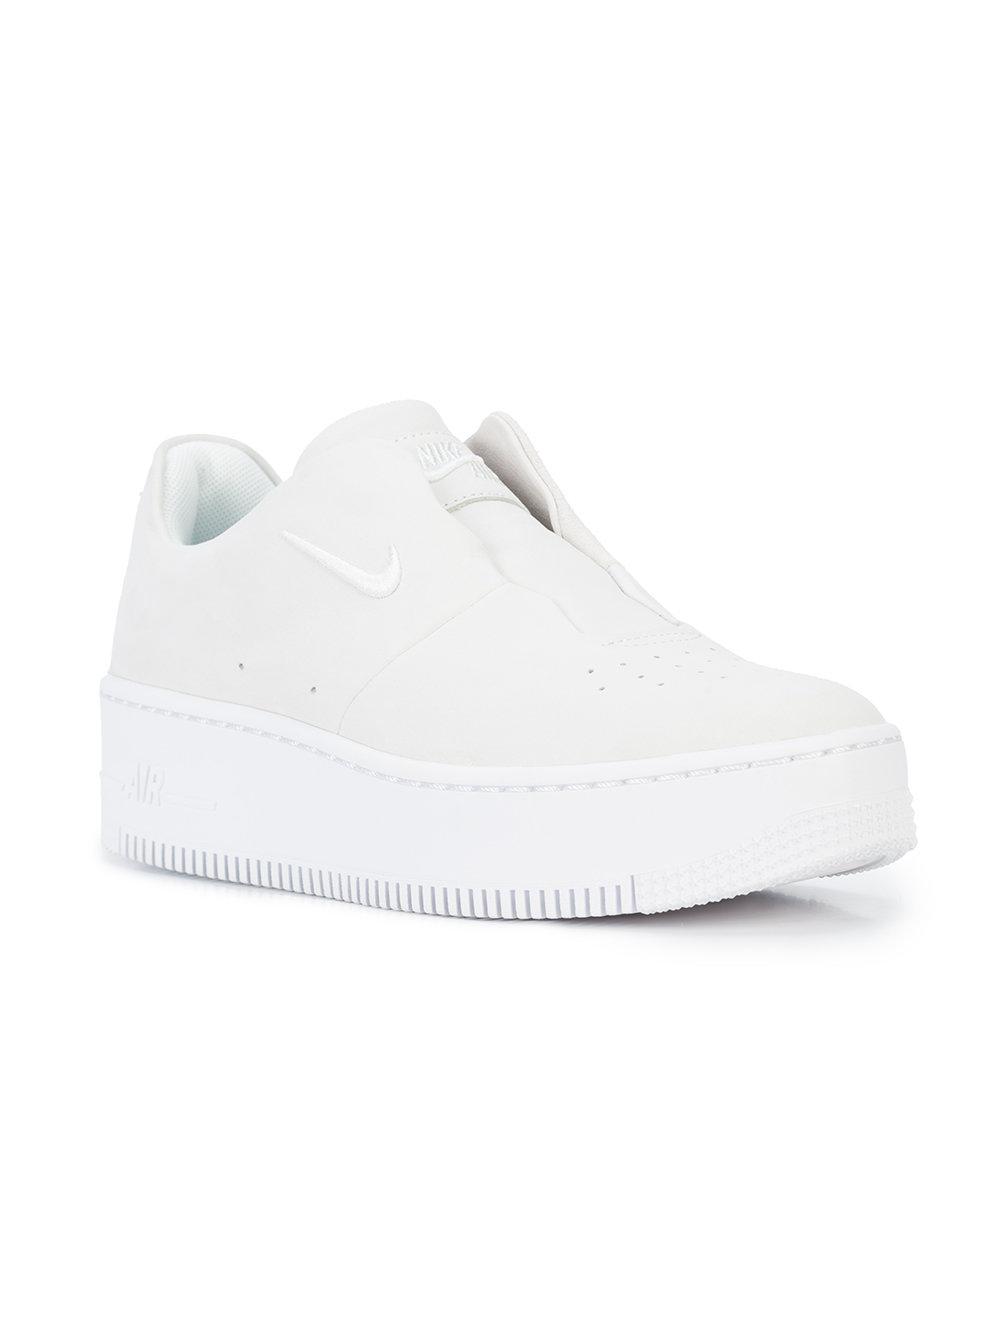 laceless air force 1